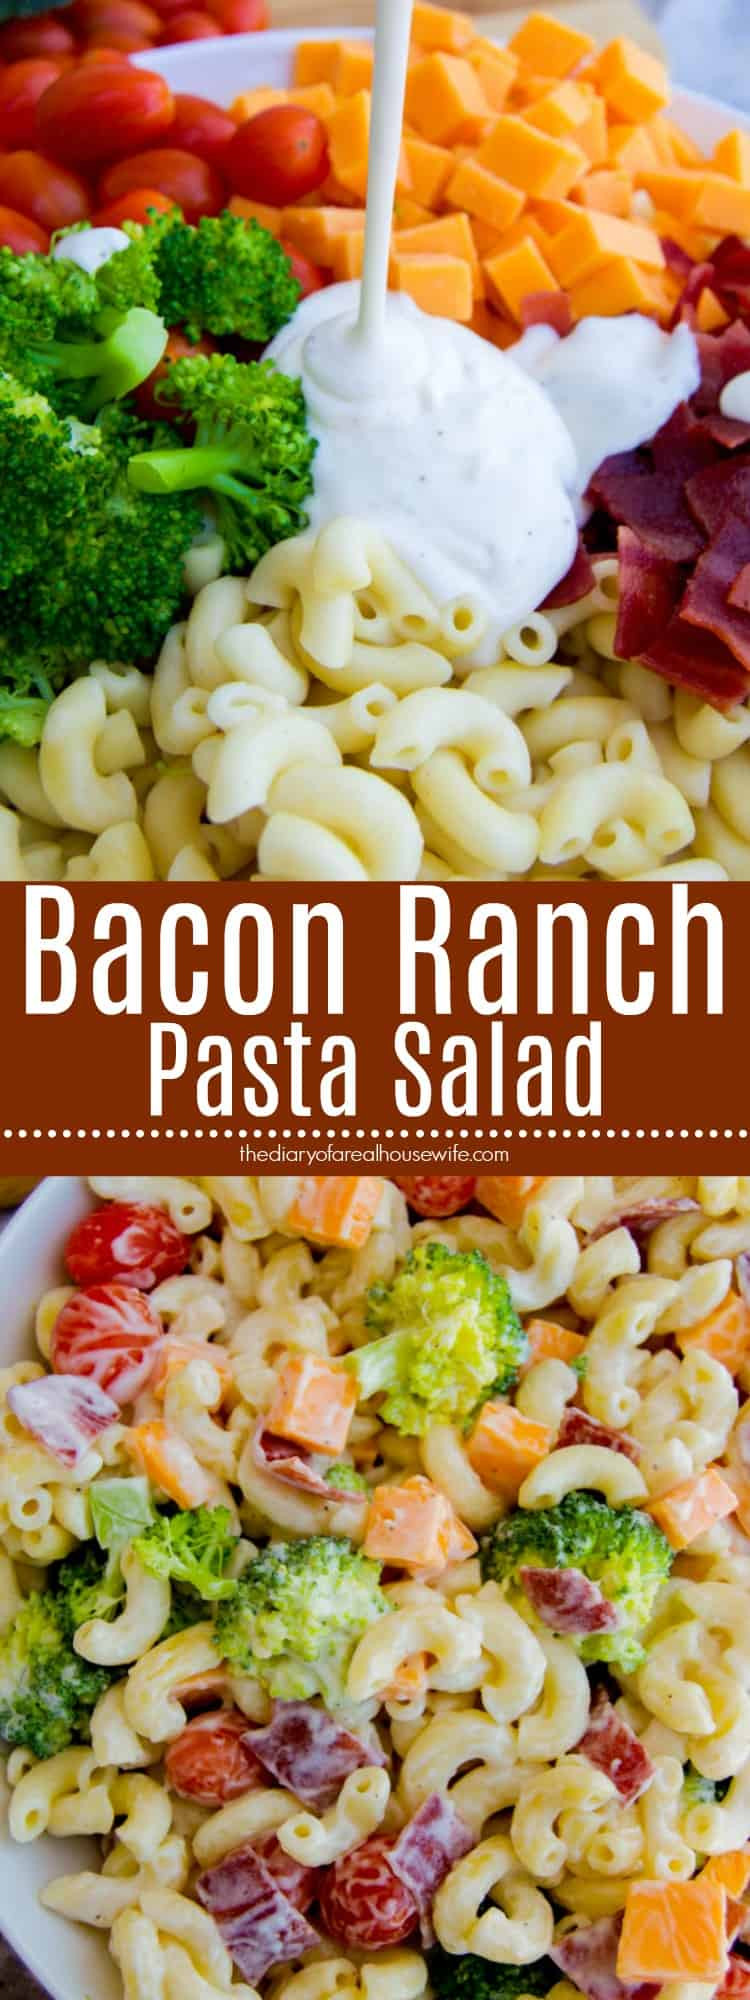 Bacon Ranch Pasta Salad
 Bacon Ranch Pasta Salad The Diary of a Real Housewife